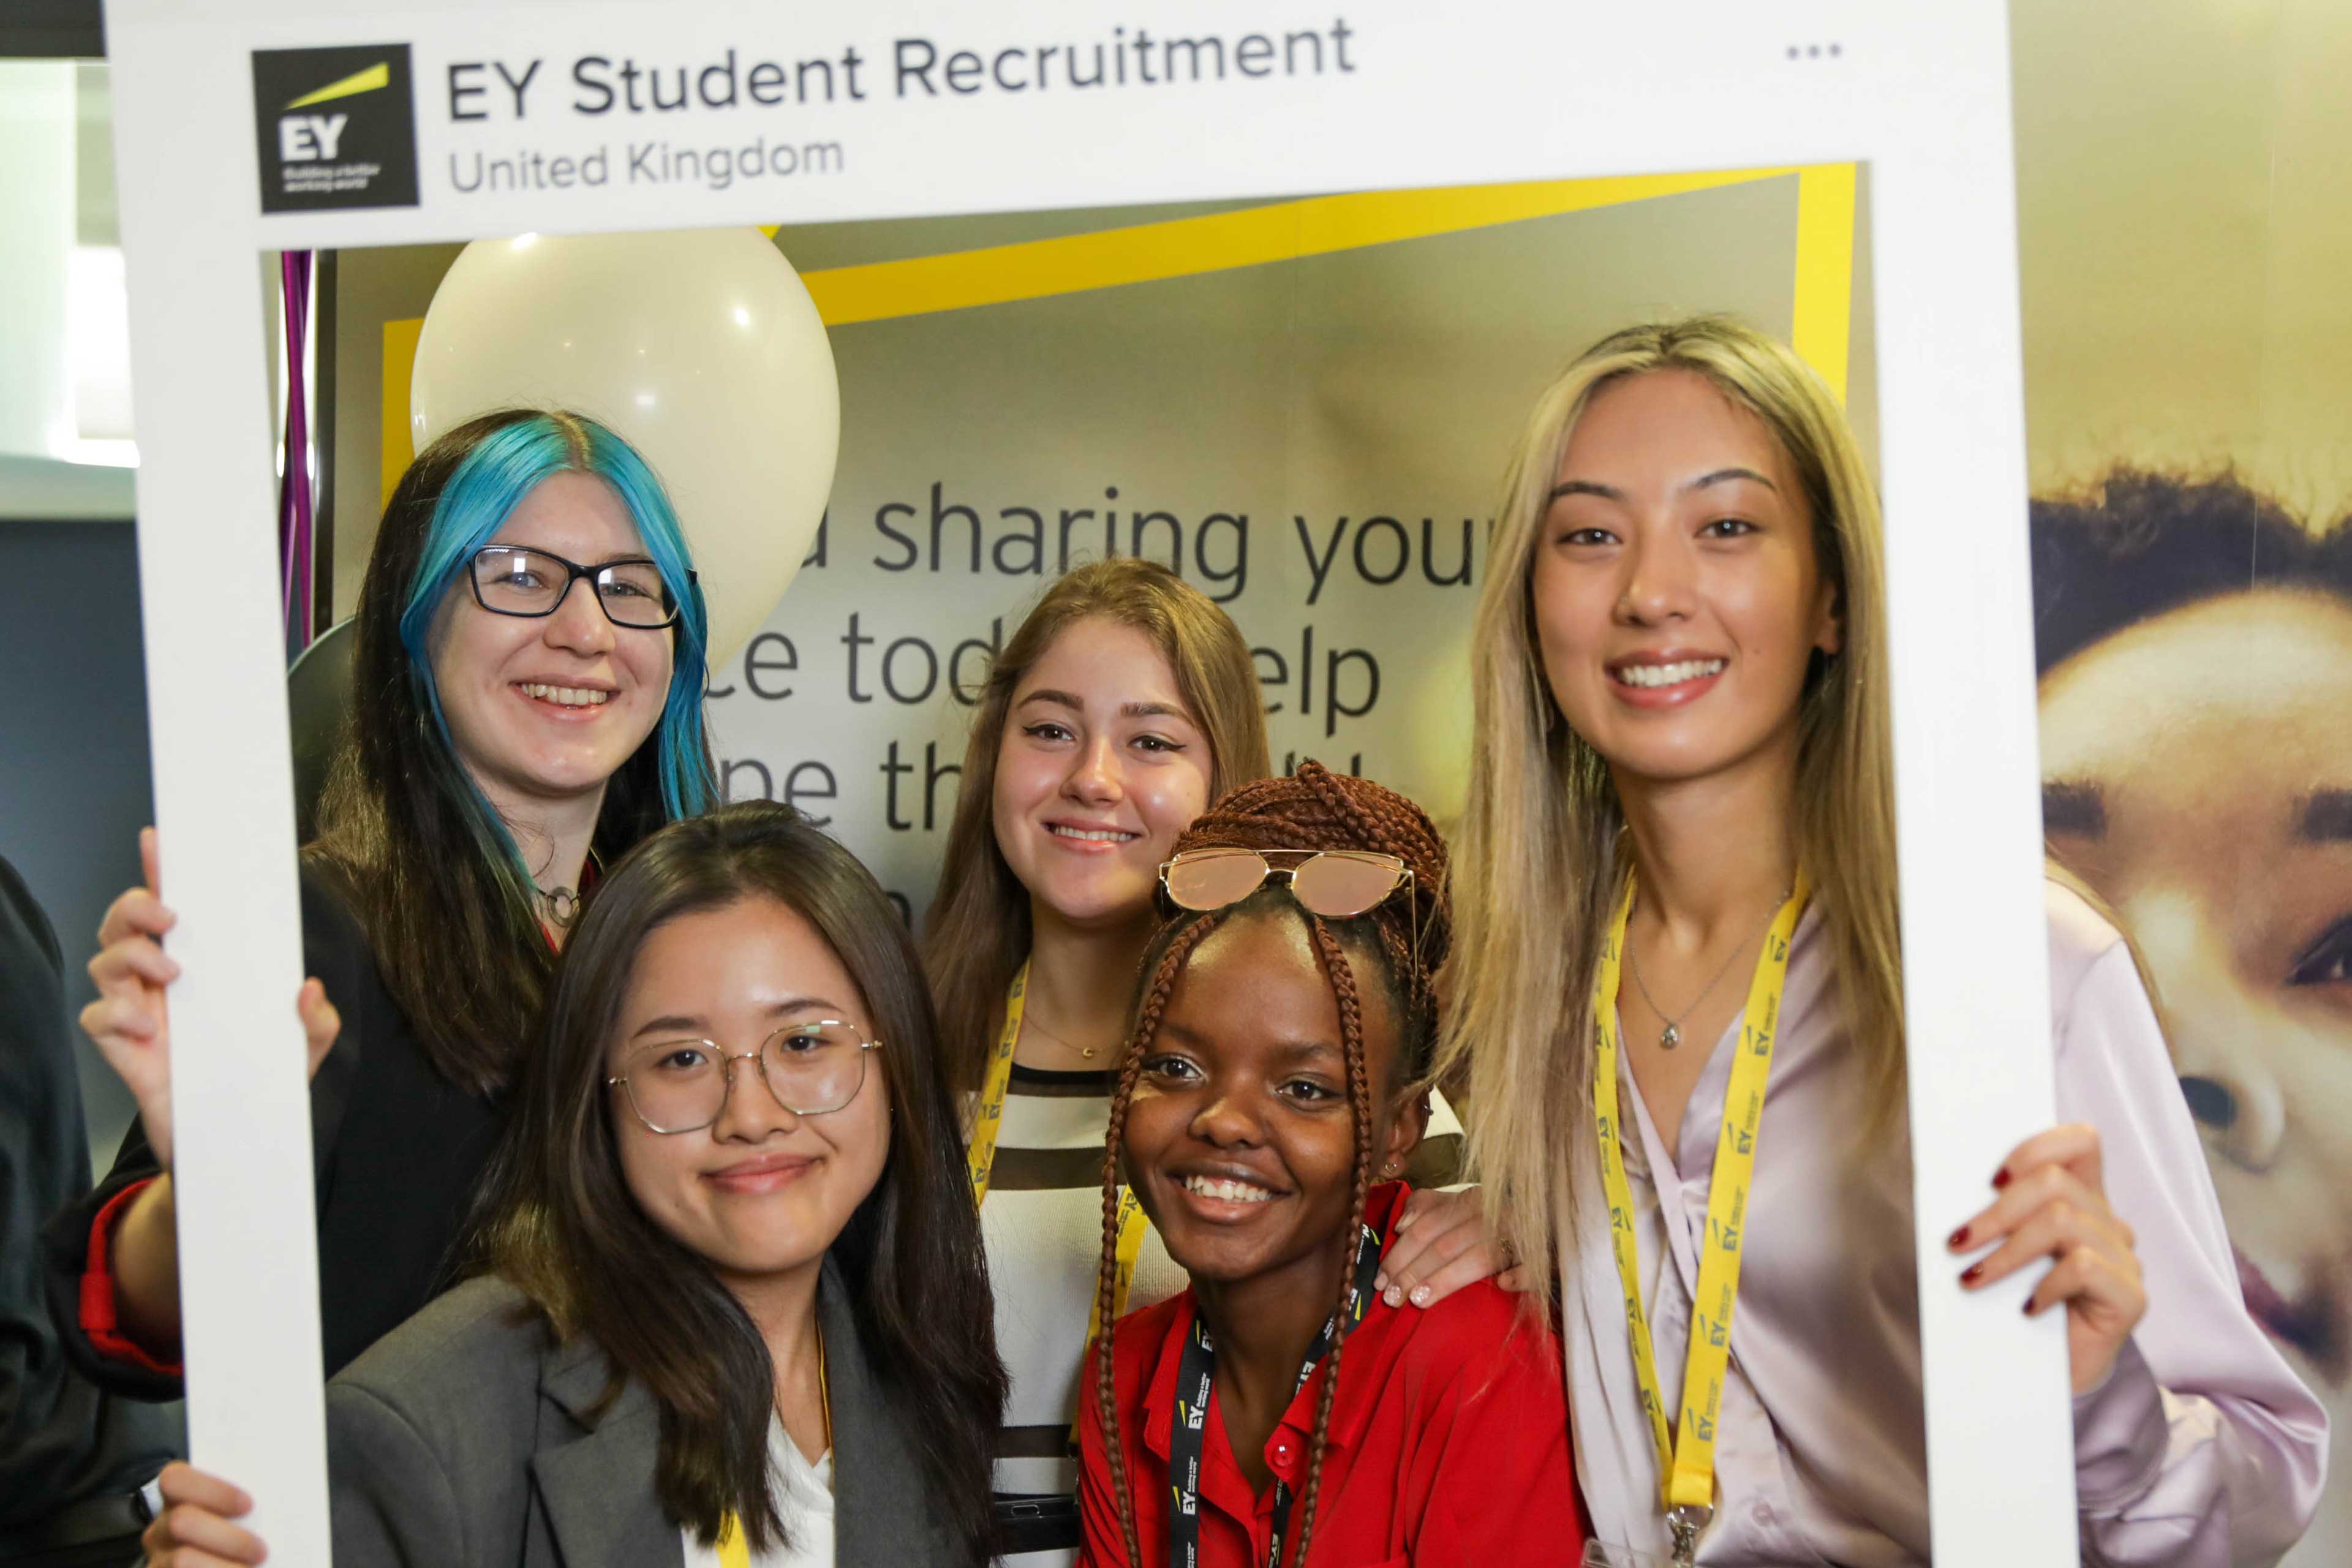 Group of students at an EY event